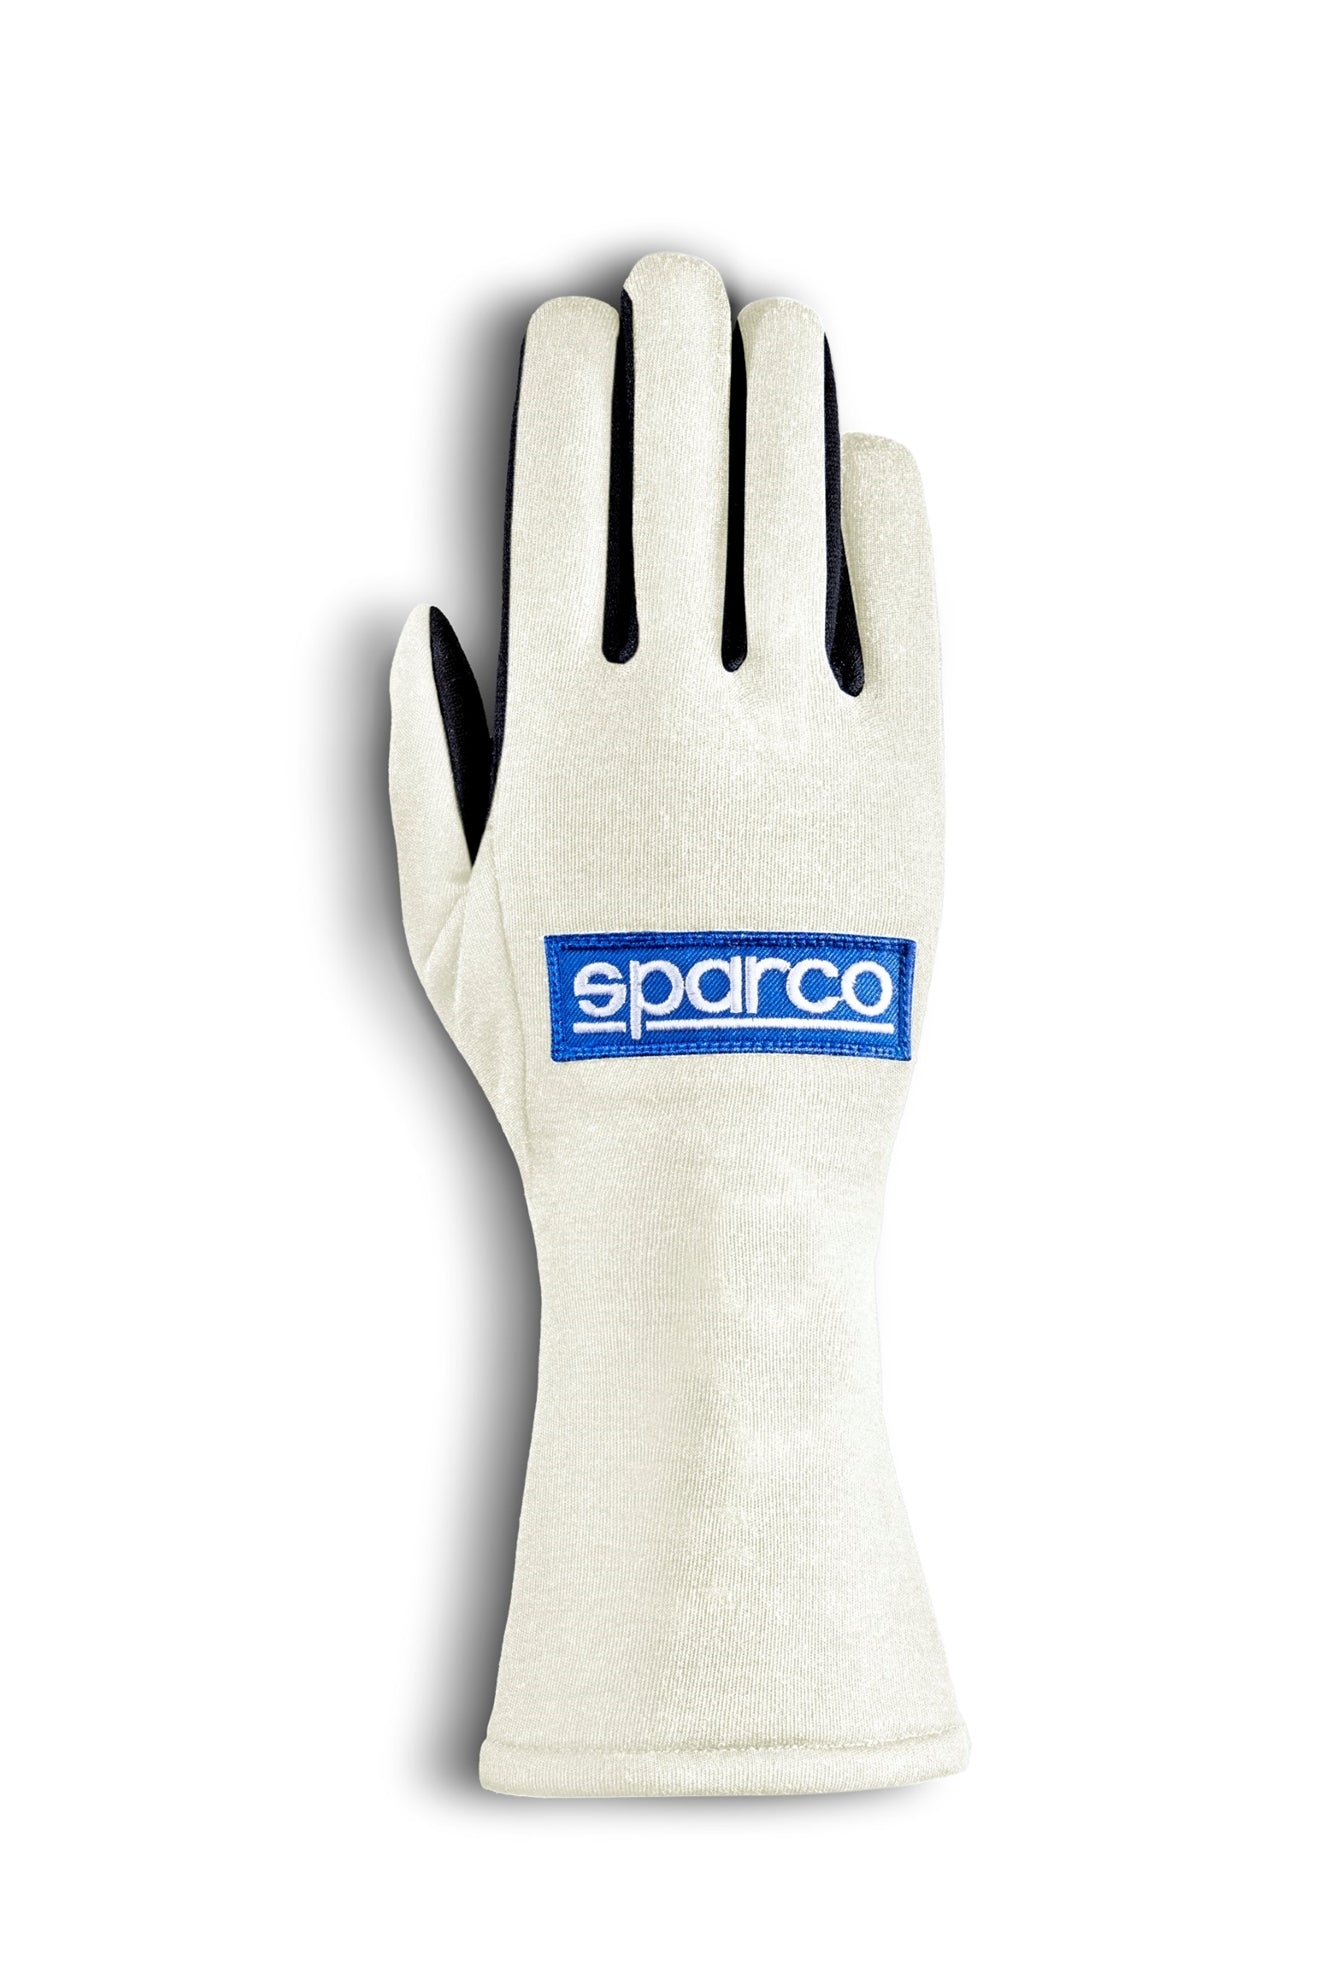 Sparco Land Classic 2022 Racing Gloves